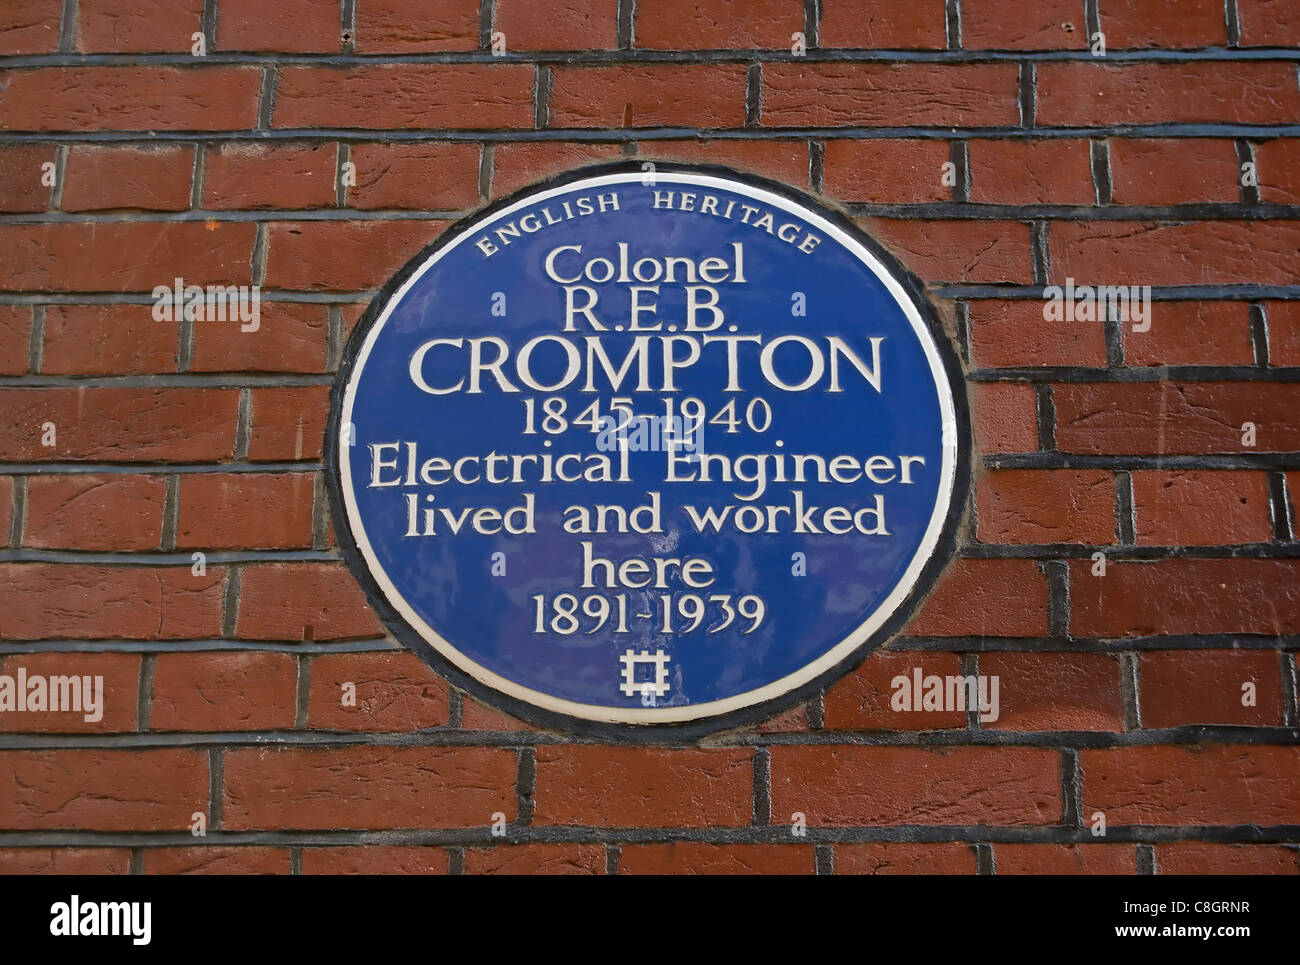 english heritage blue plaque marking a home of electrical engineer colonel r.e.b. crompton, kensington, london, england Stock Photo